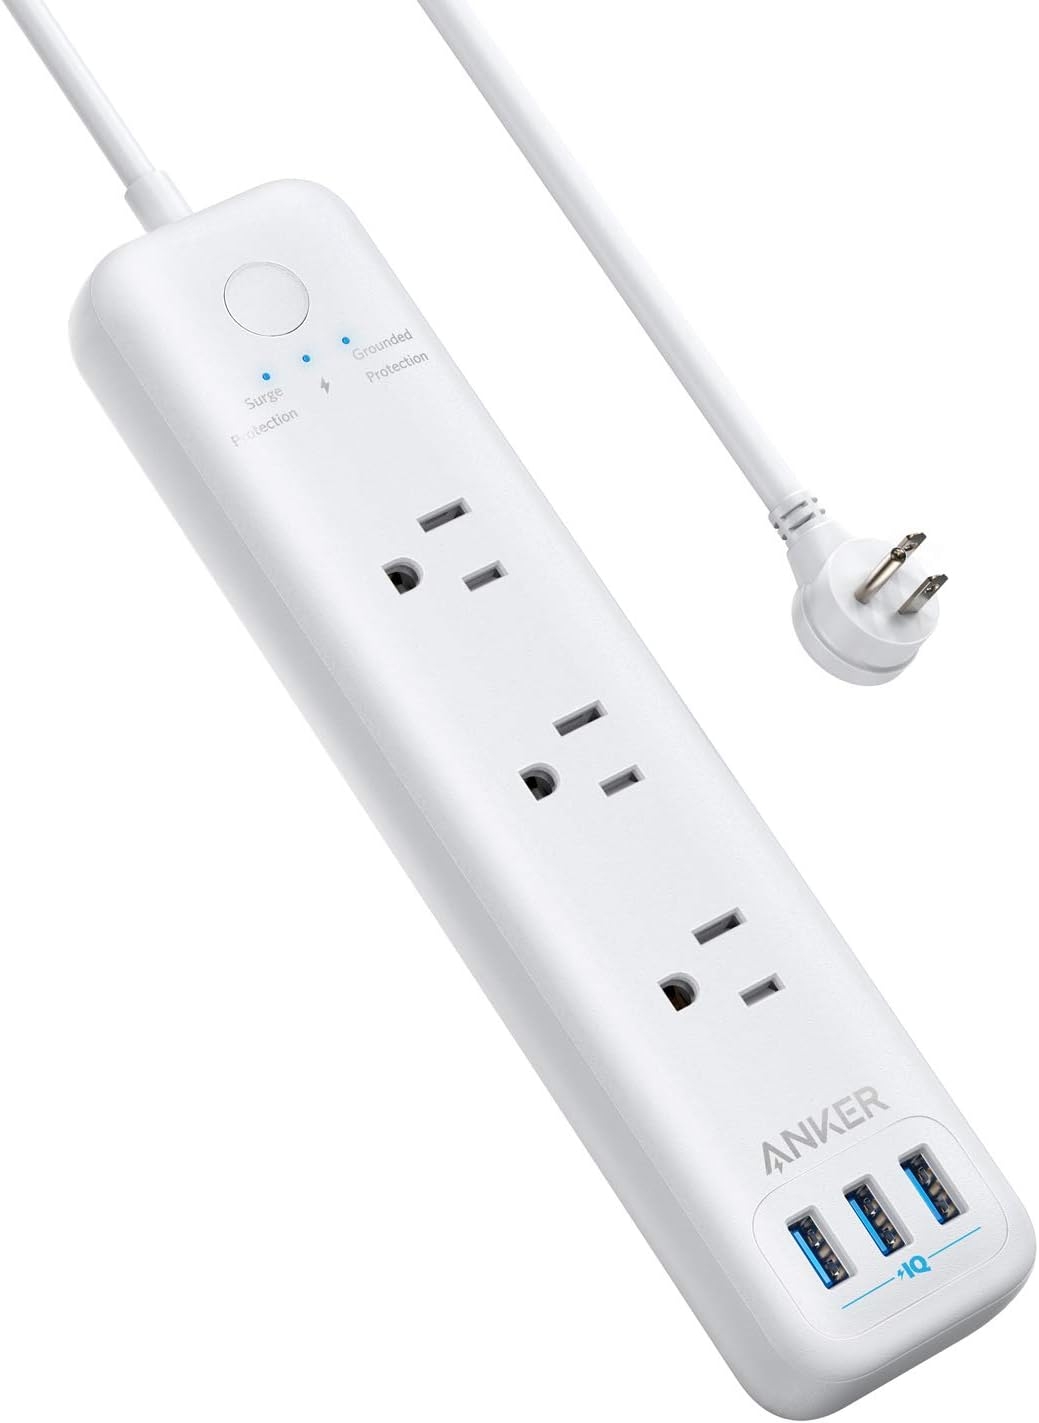 Power Strip with USB, Anker 3-Outlet & 3 PowerIQ USB Power Strip Surge Protector, PowerPort Strip 3 with 5 Foot Long Extension Cord, Flat Plug, Safety Shutter, for Home, Office (300 J)